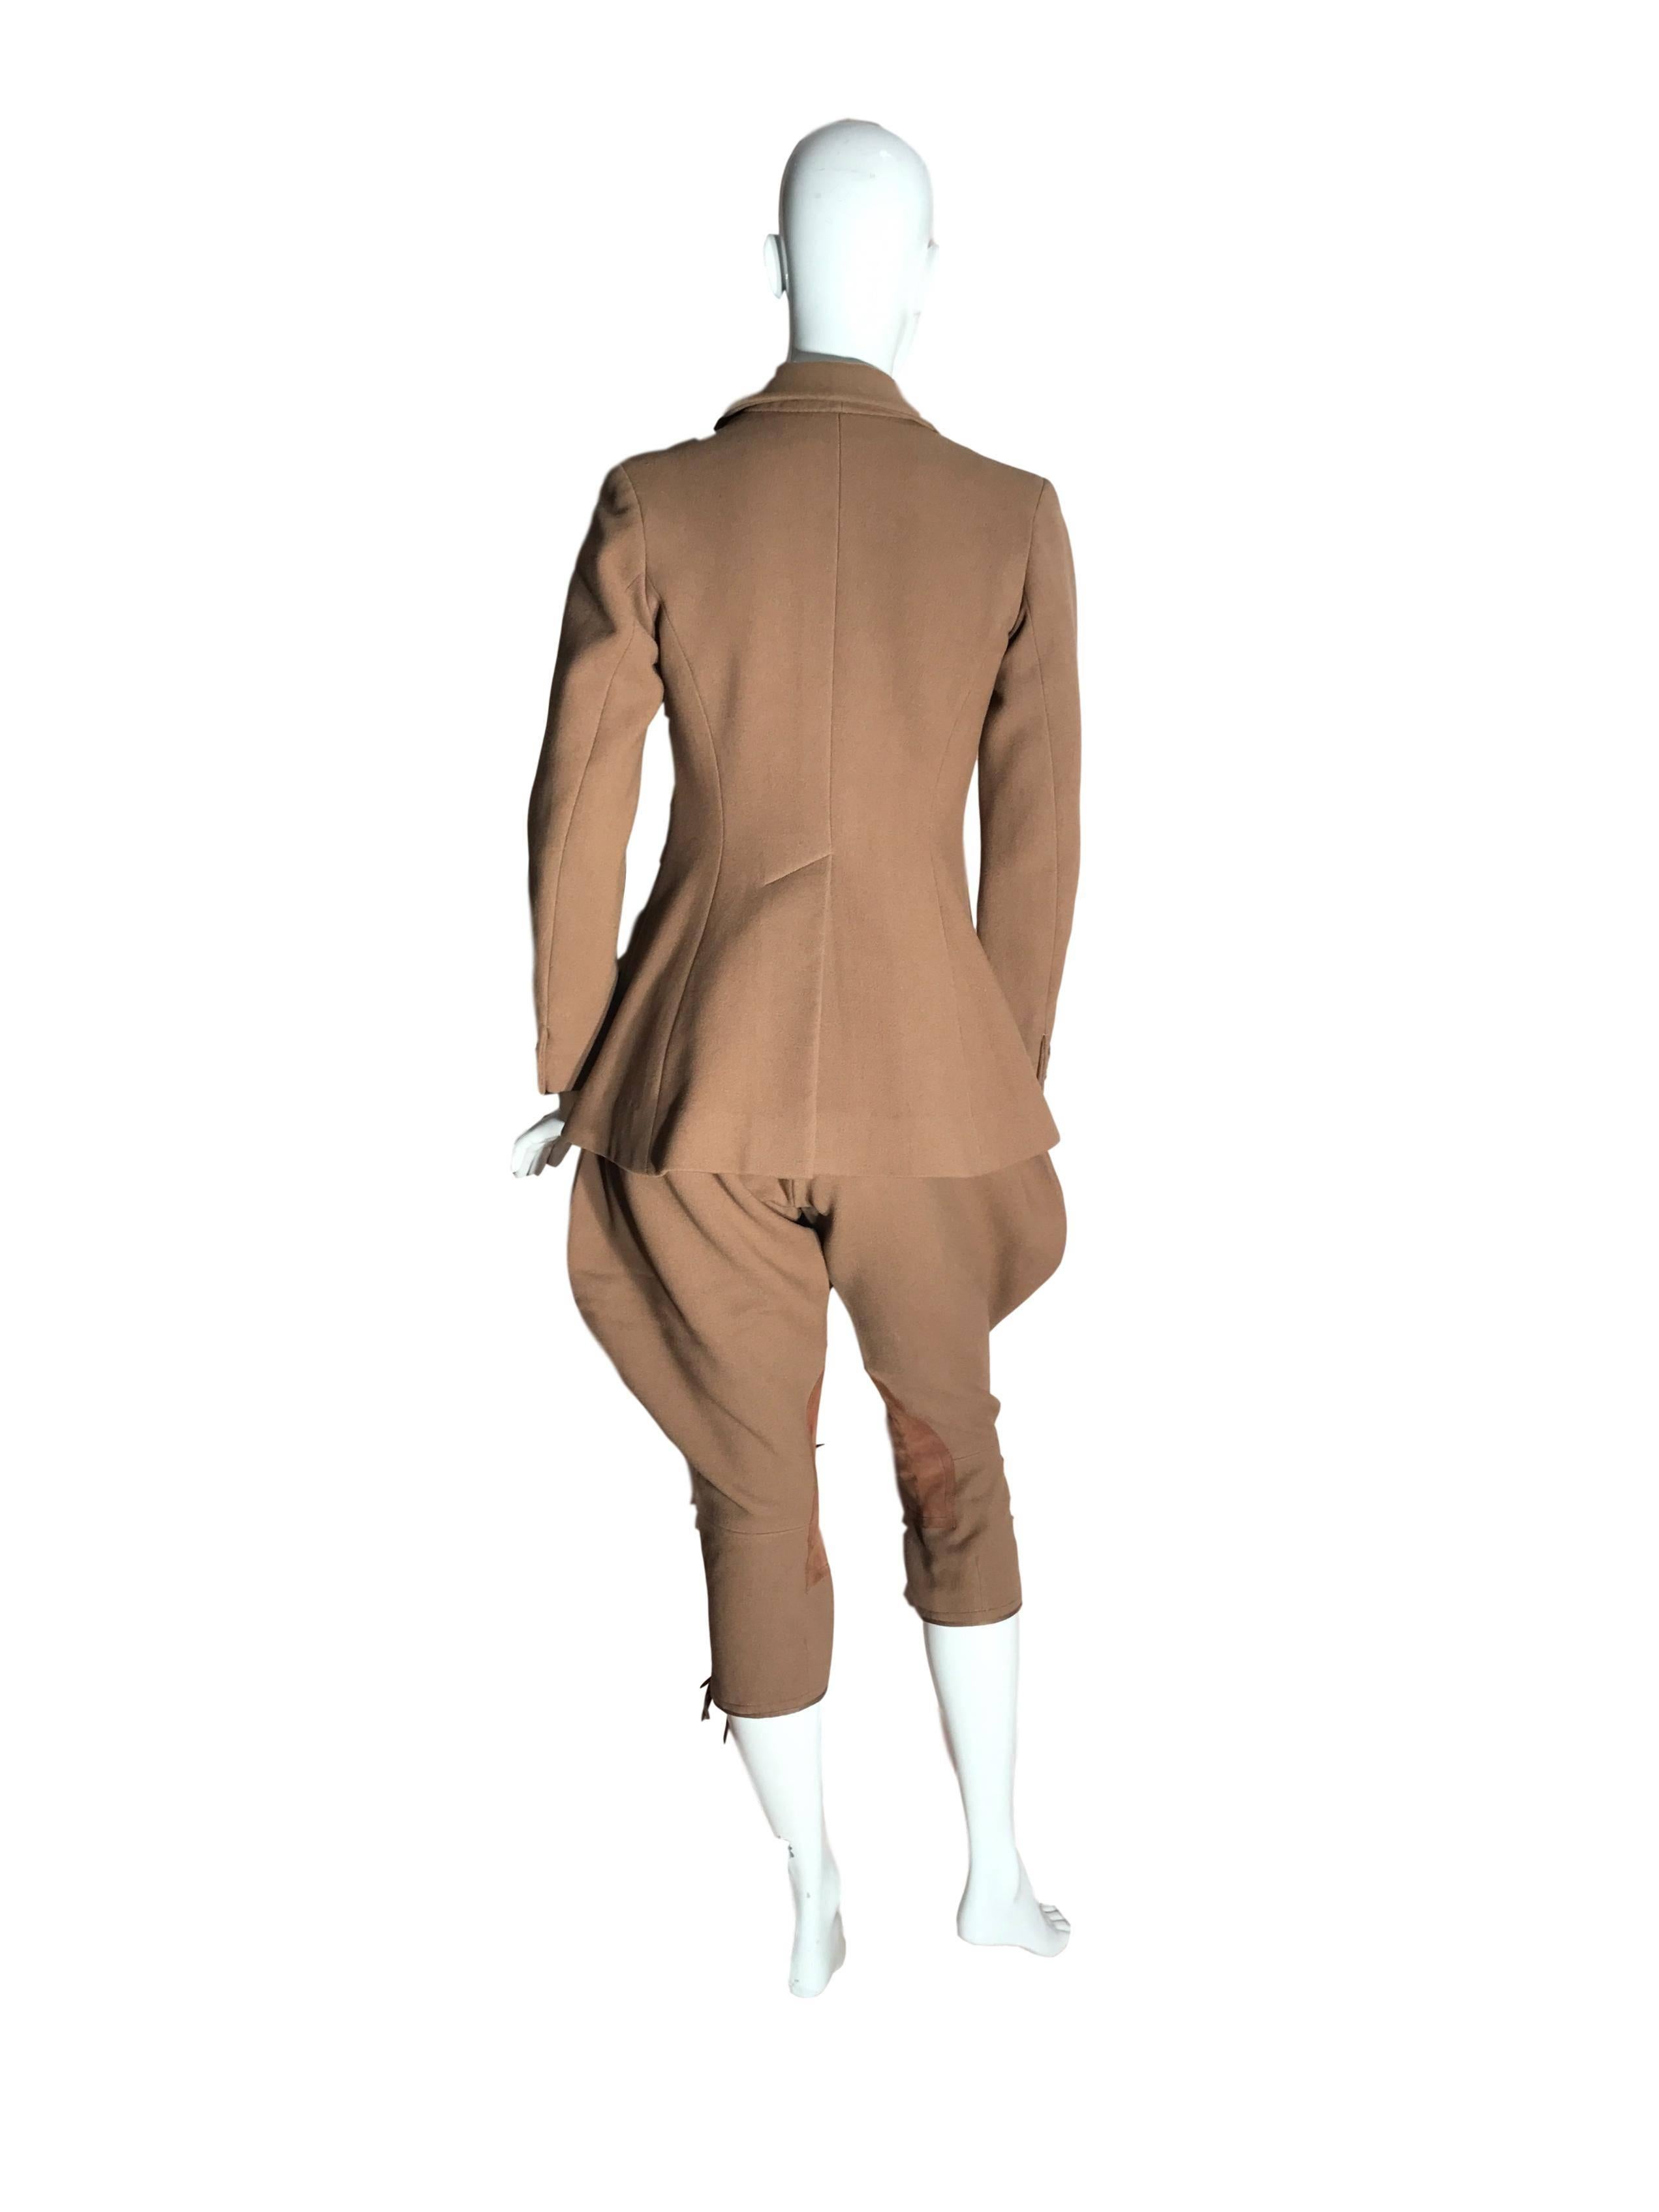 1930s "Werff Bros" tailored riding suit. Made from a camel colour heavy wool, satin lined blazer with structured shoulders. Jodhpurs are side button fastening high on waist and lace tied at the bottom of each leg.

Excellent condition